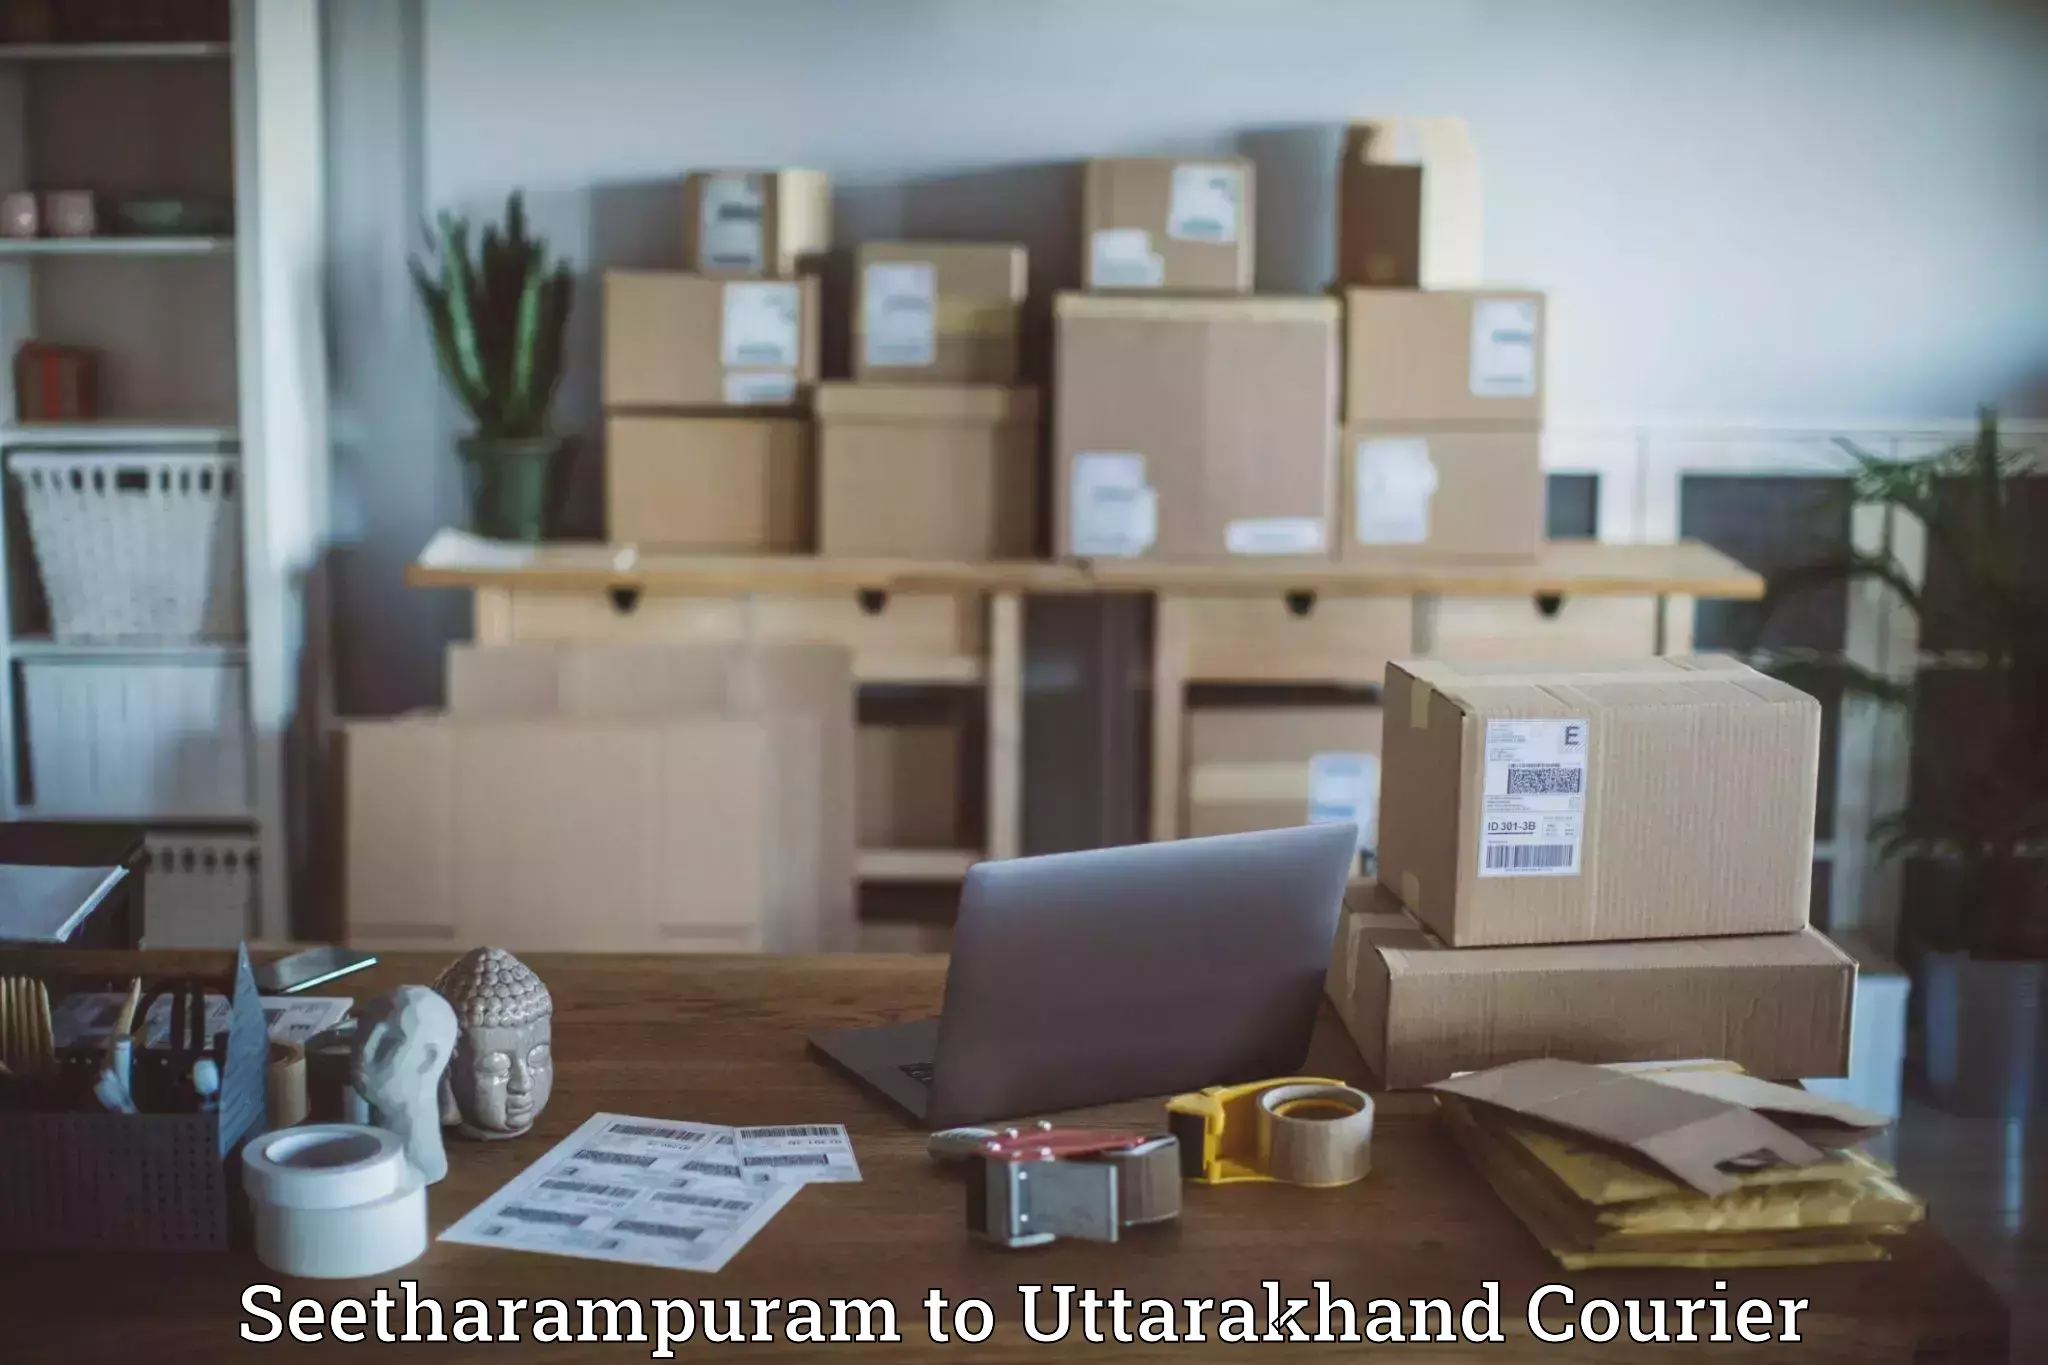 Round-the-clock parcel delivery Seetharampuram to Doiwala